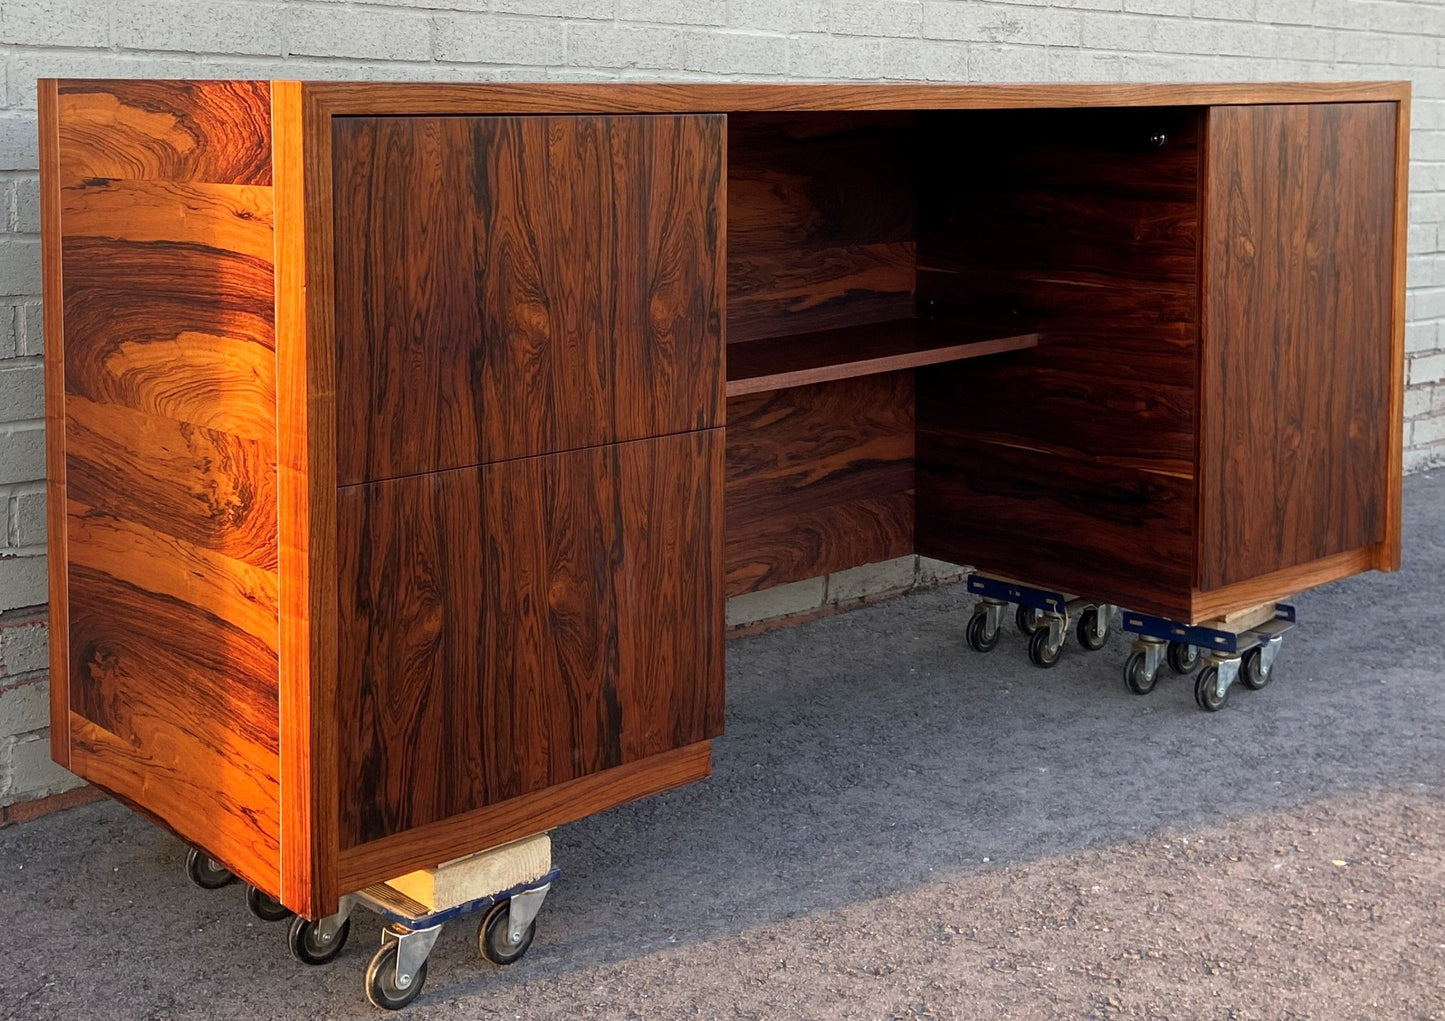 REFINISHED MCM rosewood credenza by Leif Jacobsen